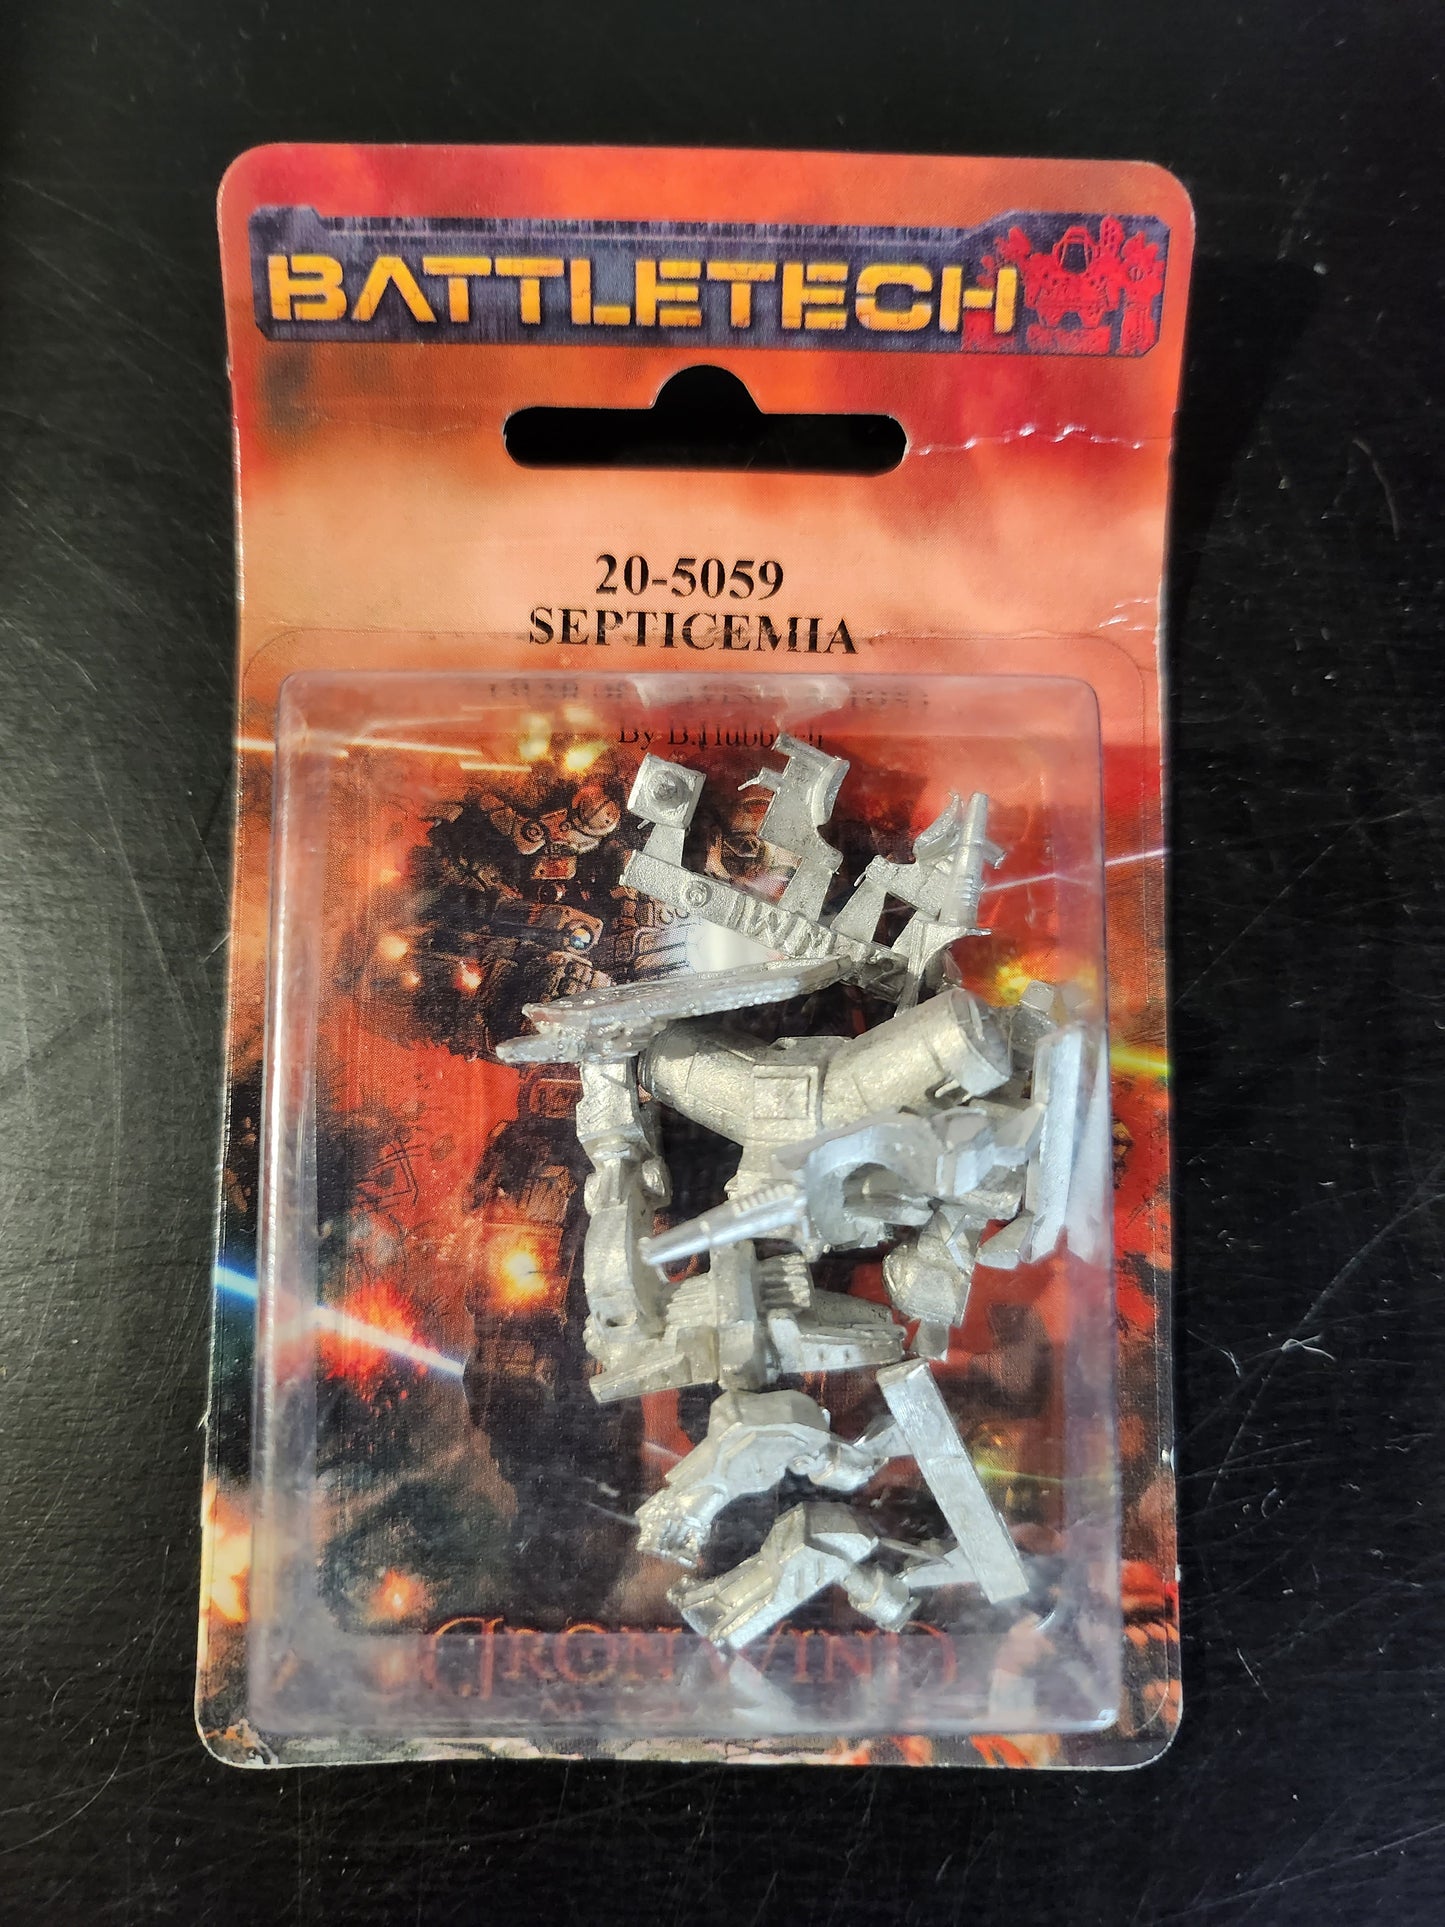 BattleTech: 20-5059 Pariah (Septicemia) E (*See Per Order Flat Rate Shipping)